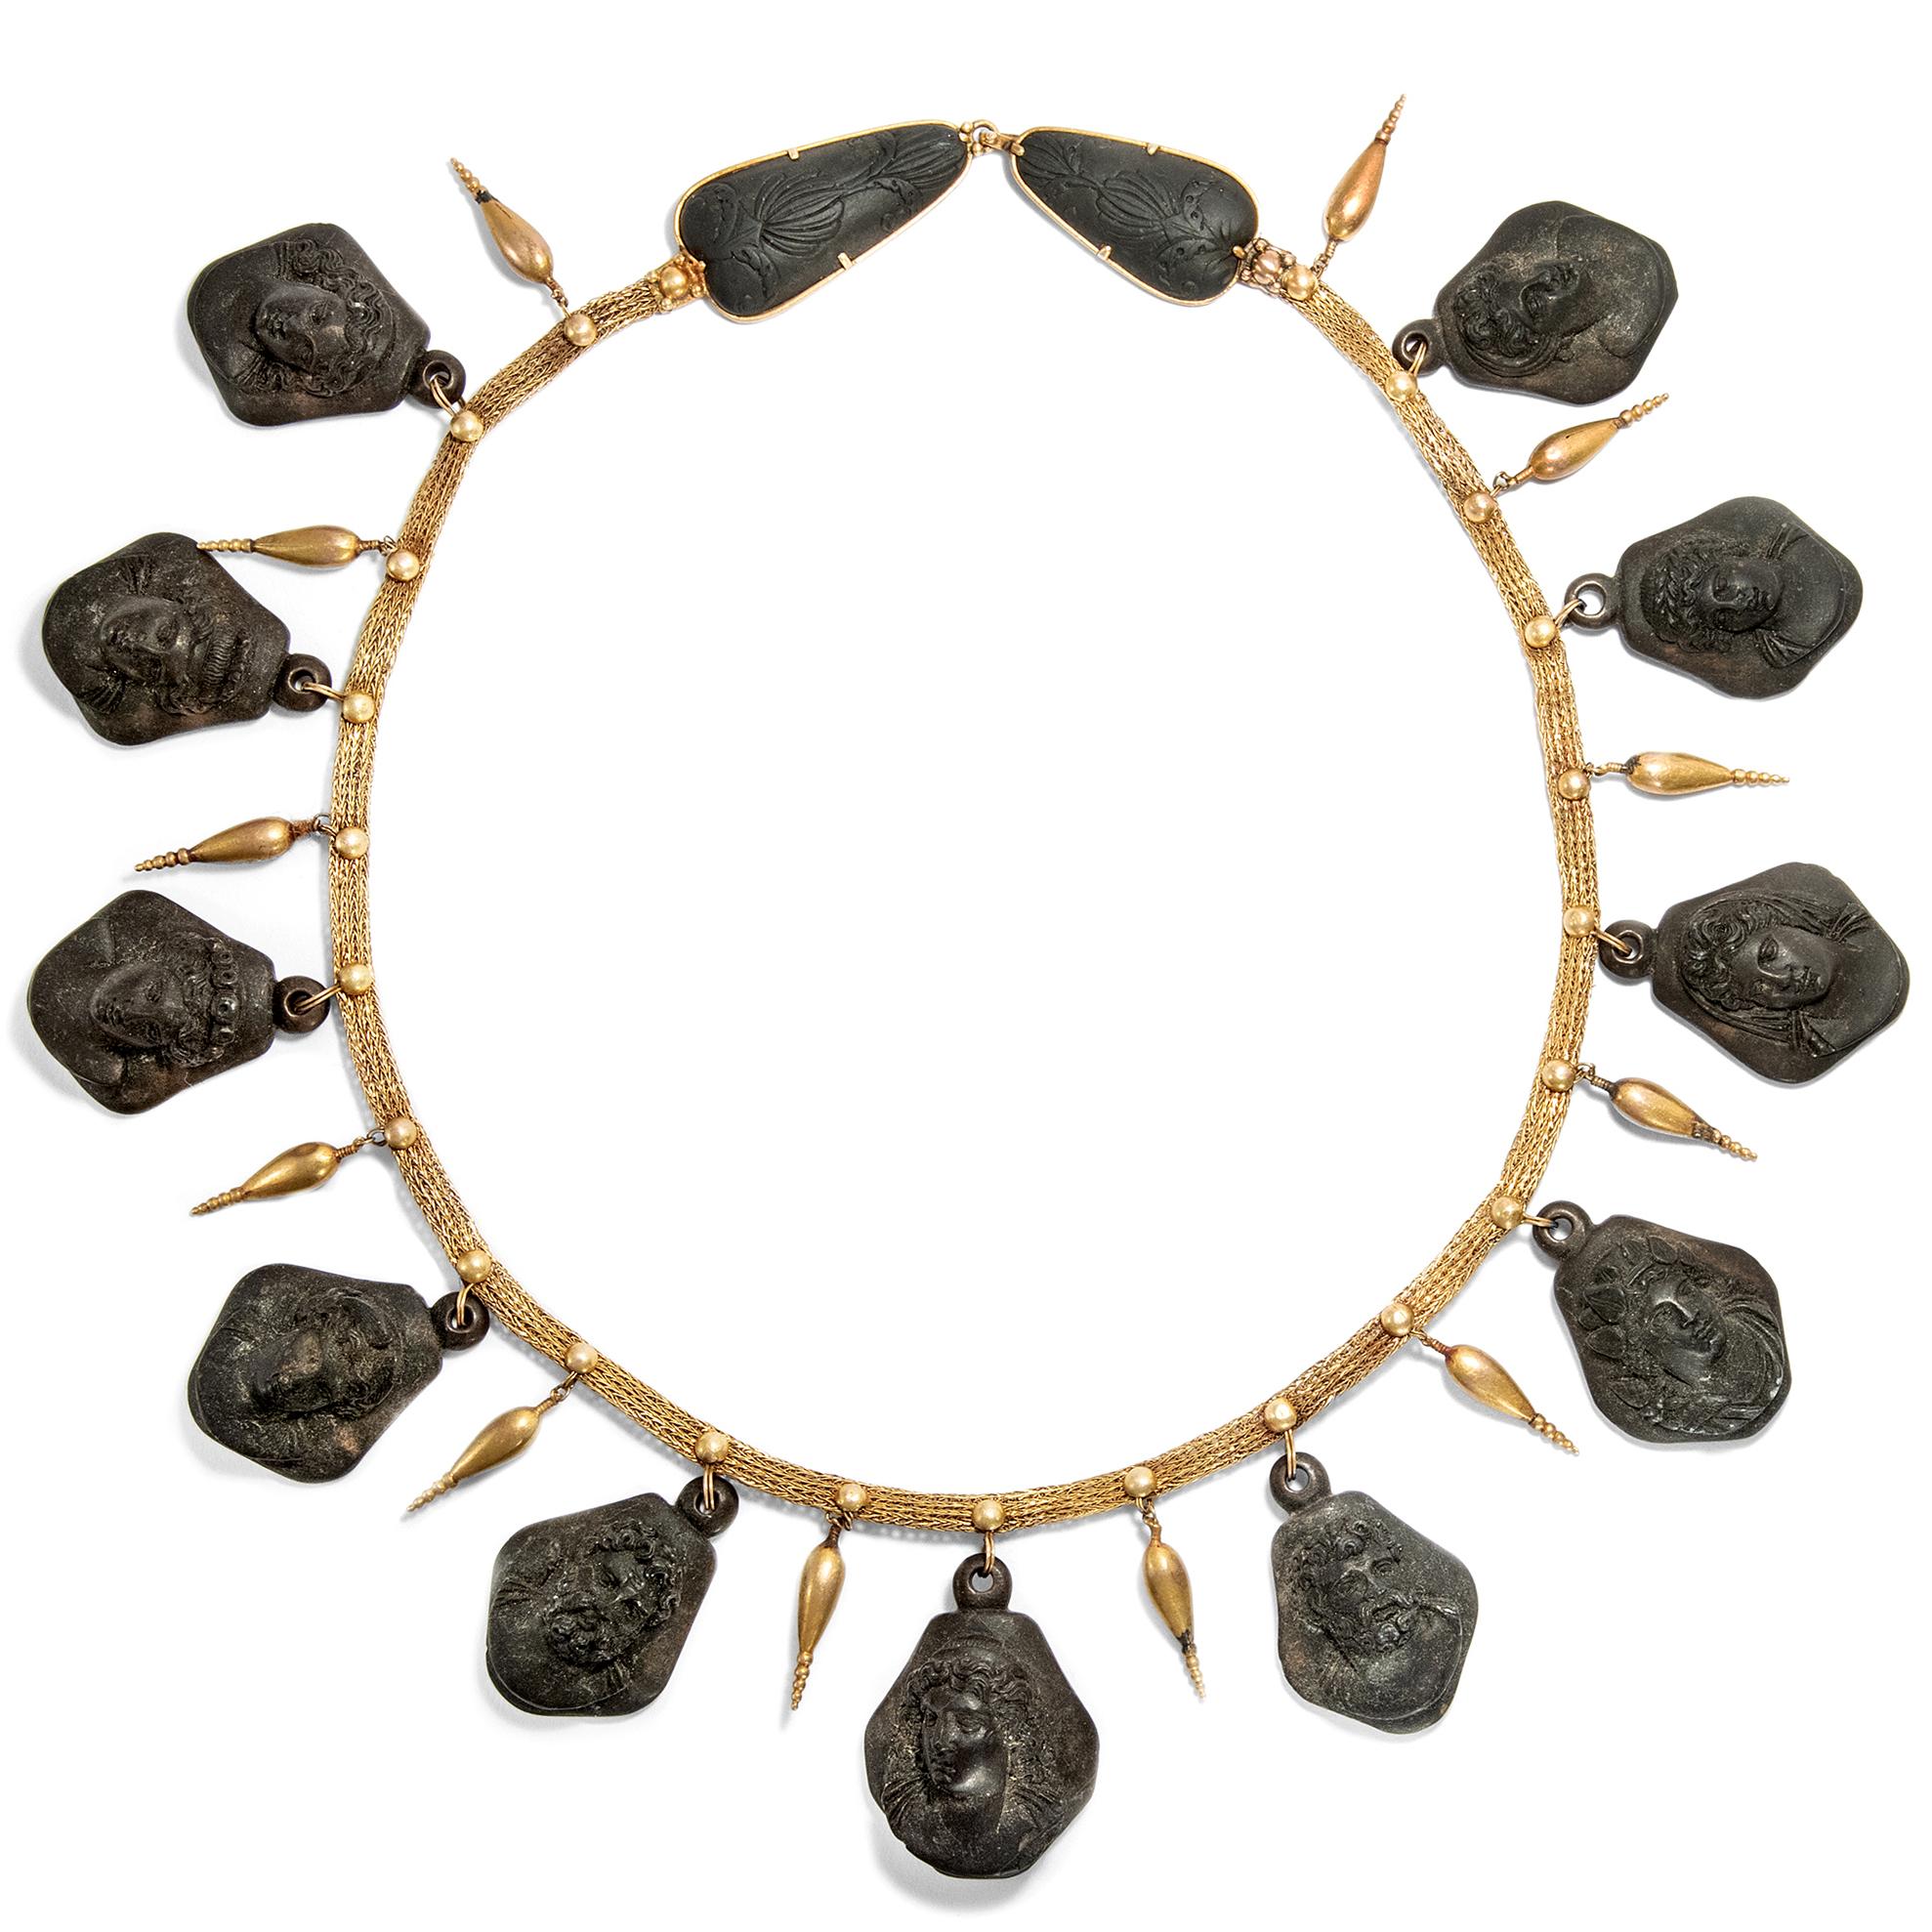 From the 1820s onwards, Etruscan jewellery had been found in excavations in Italy – just at a time when the art and culture of antiquity was all the rage, and classical studies were part of every higher education. Alexandrine Bonaparte, Princess of